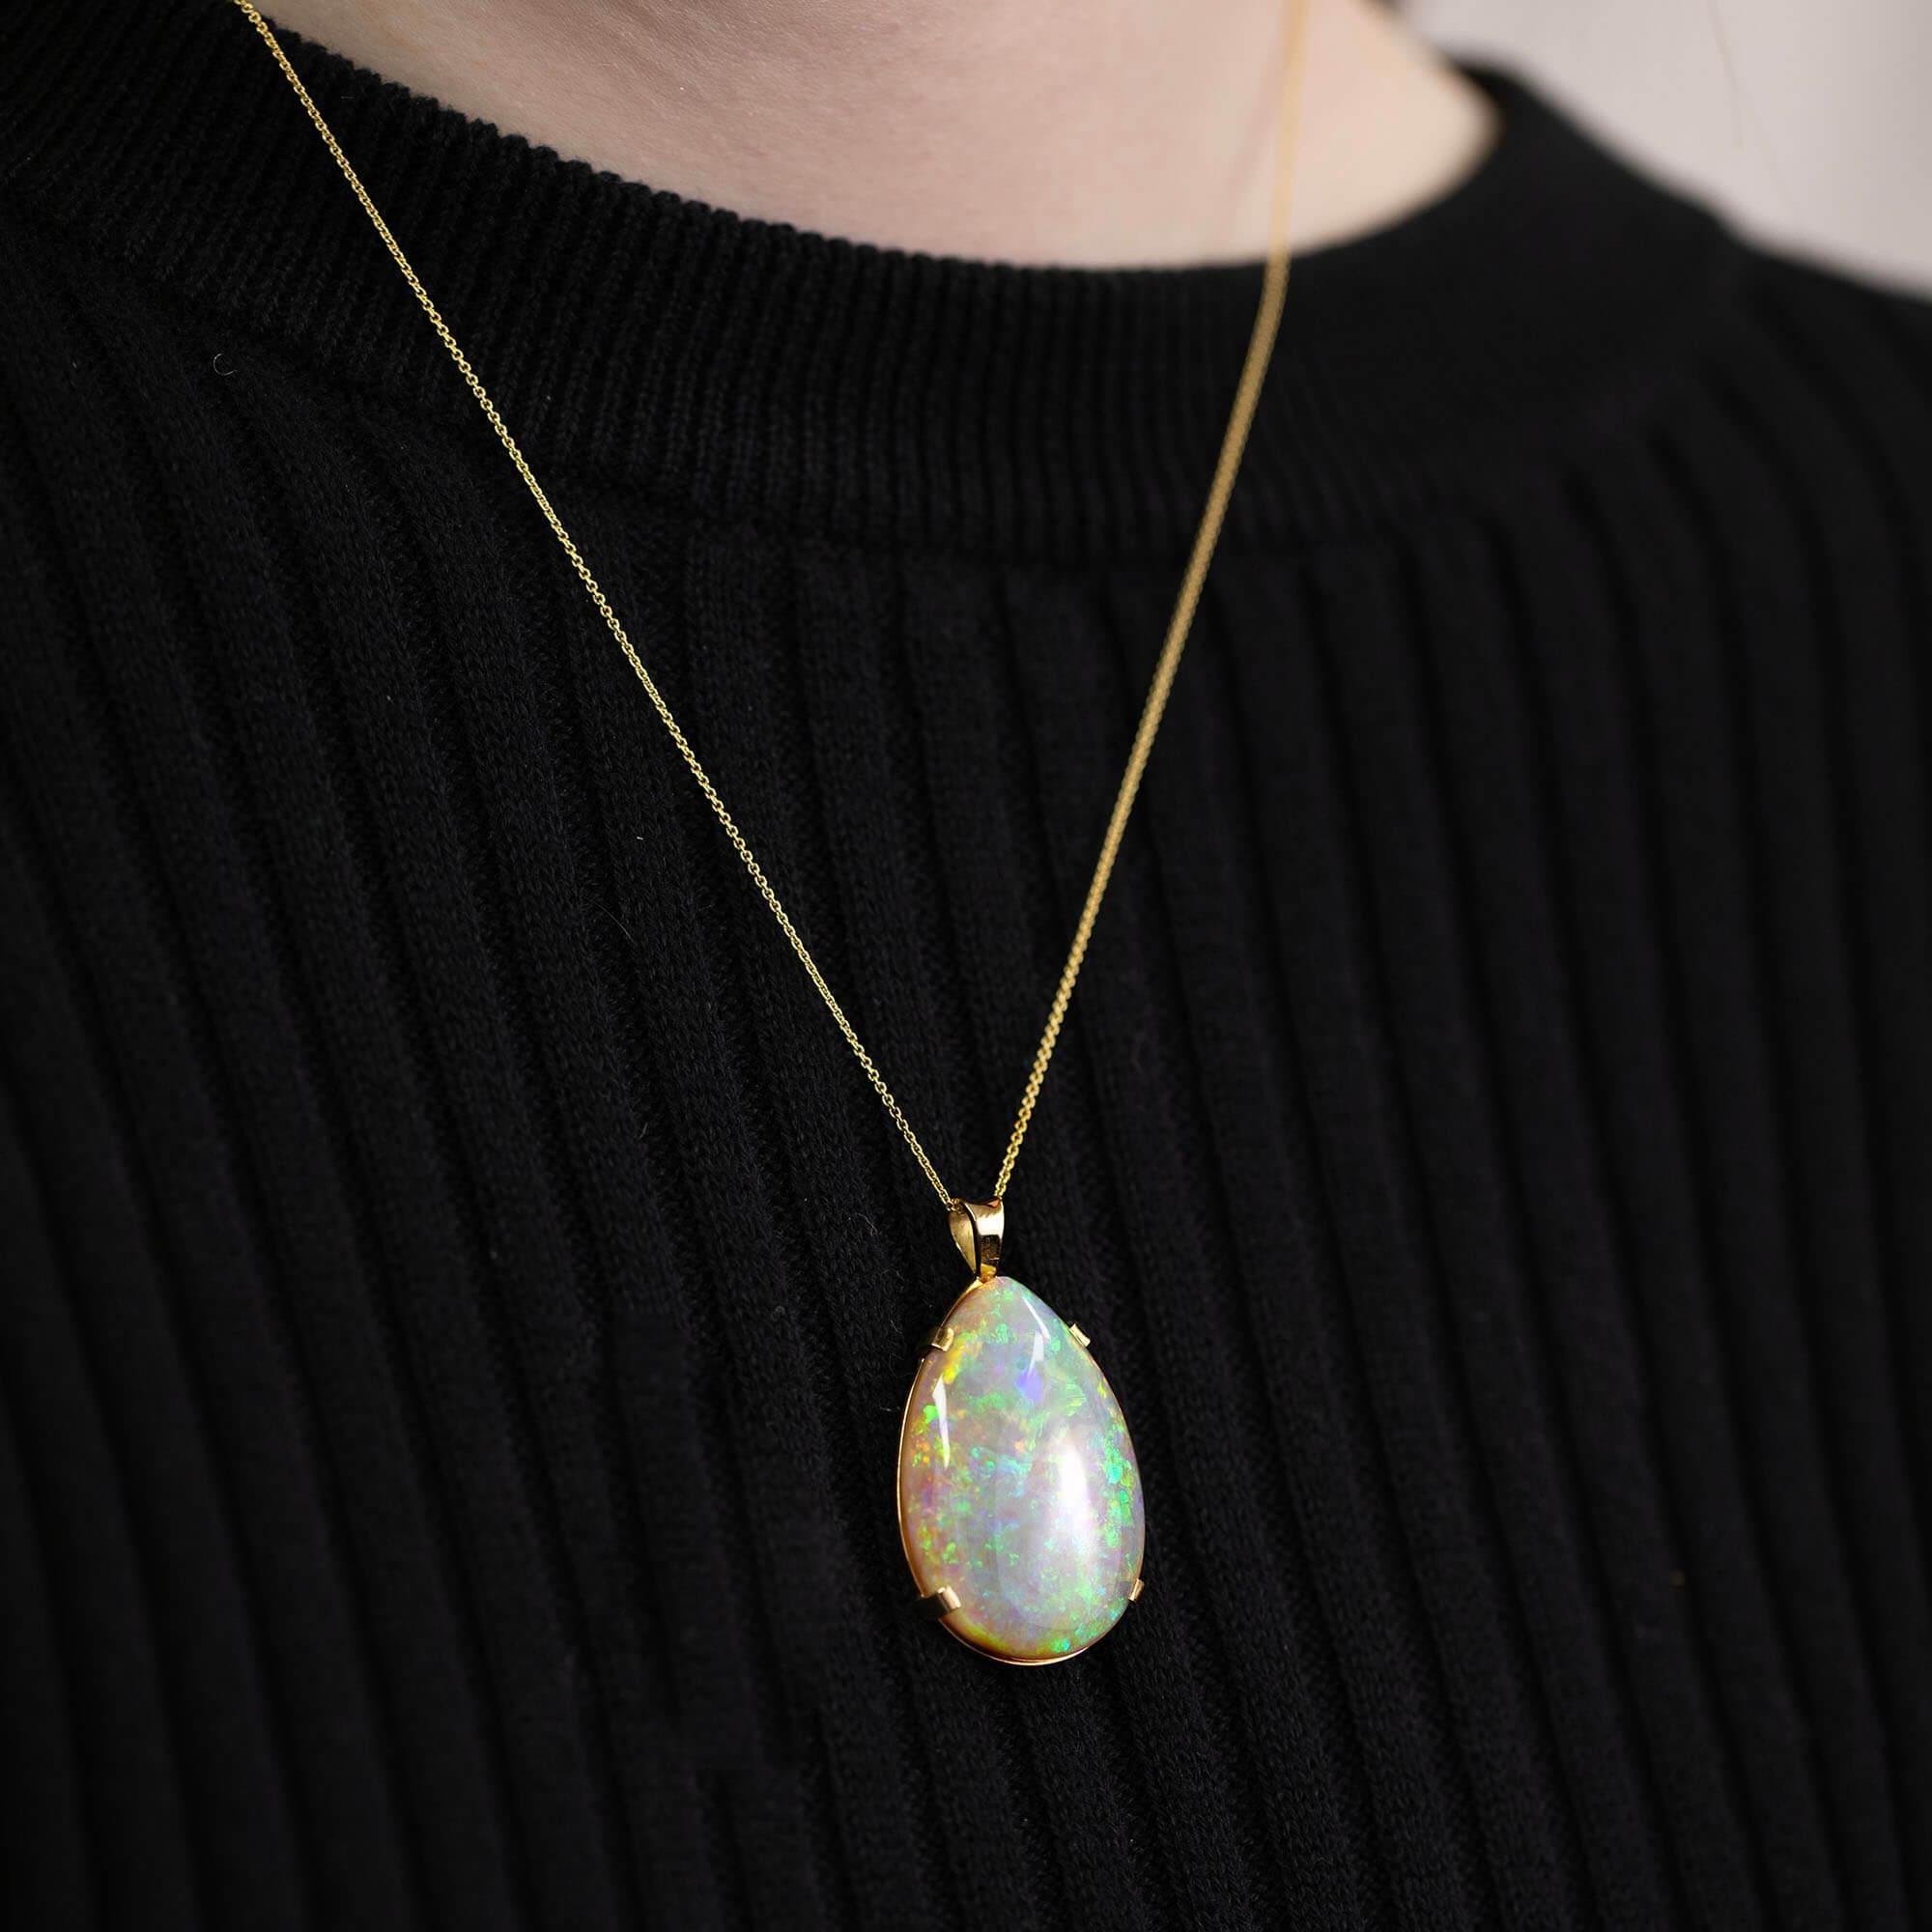 One handmade 18k yellow gold, solid Australian opal pear-shaped pendant. The opal is set in a four claw setting and has a plain runner a chain.

Gemstone: One (32 x 22 x 6.5mm) solid pear-shaped solid light opaque cabochon opal, class 1, with fine